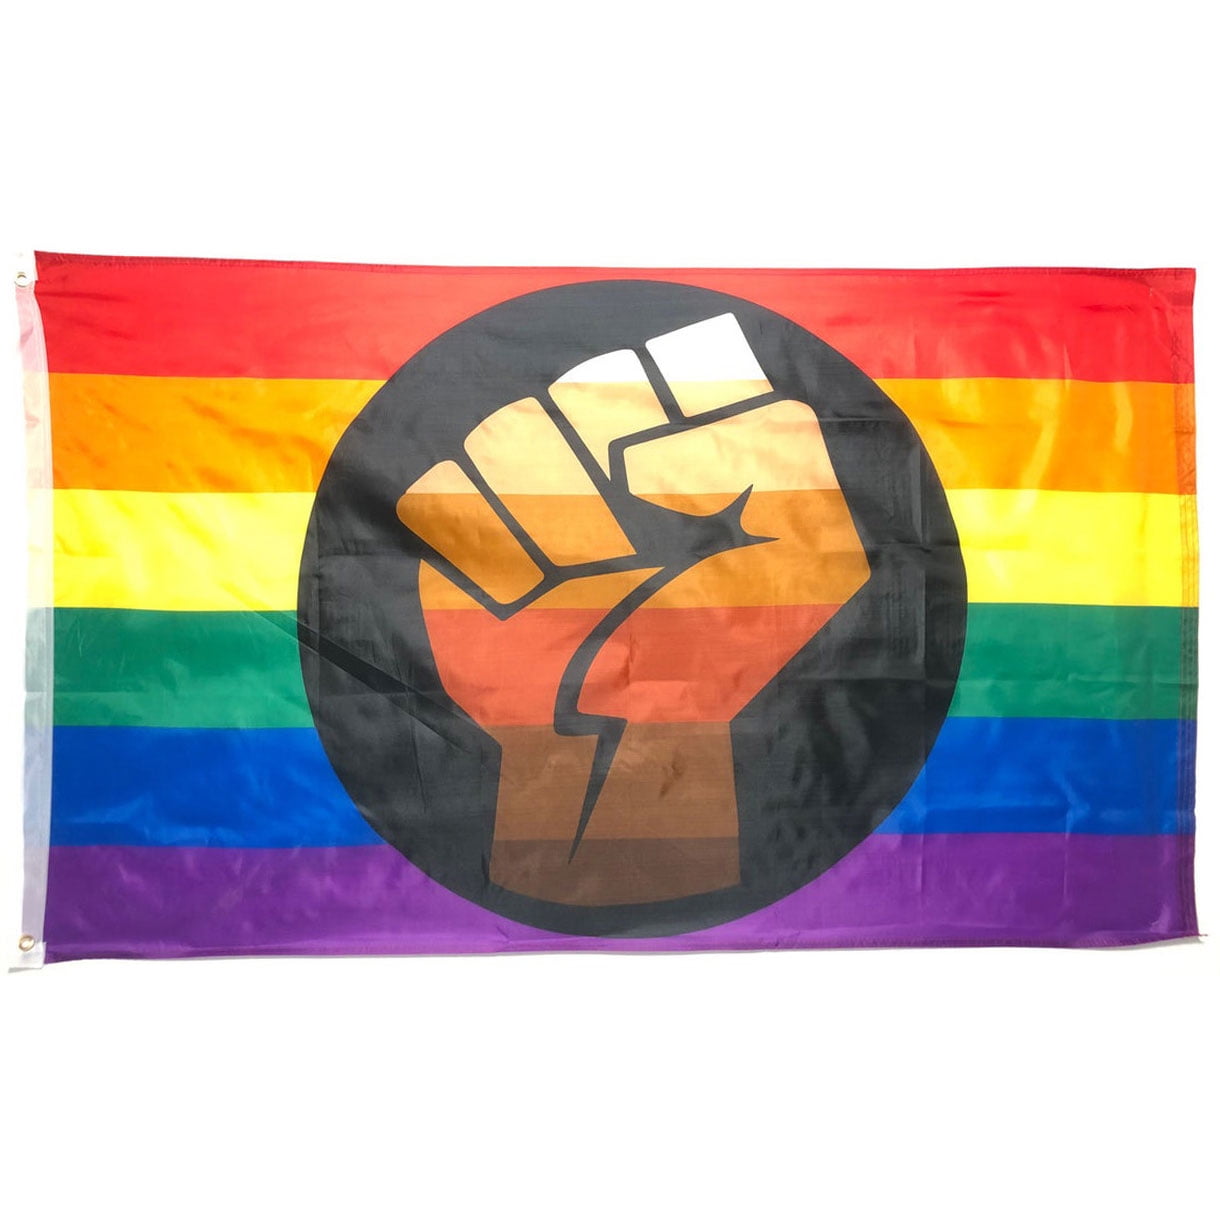 ENMOON BLM Pride Flag with Black Power Fist 3’x 5’, Poly HD Printing Perfect for Showing Your Pride LGBT Community Support Inspired by Black Brown Philadelphia